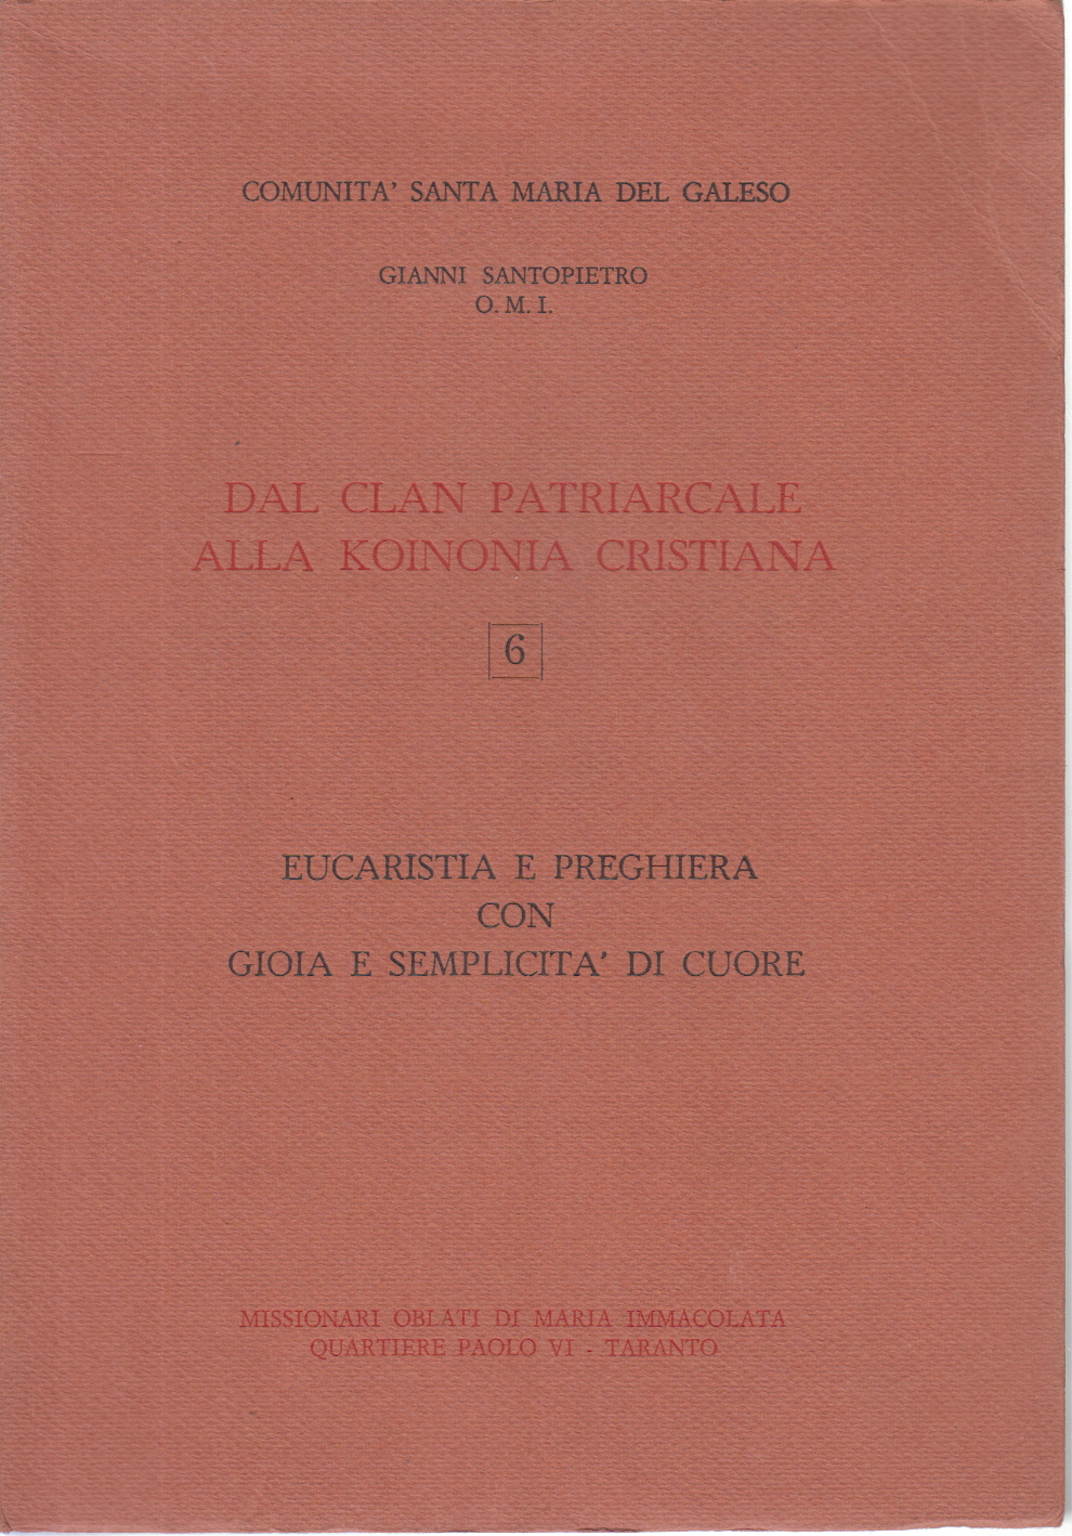 The eucharist and prayer, with joy and simplicity of c, Gianni Santopietro O. M. I.